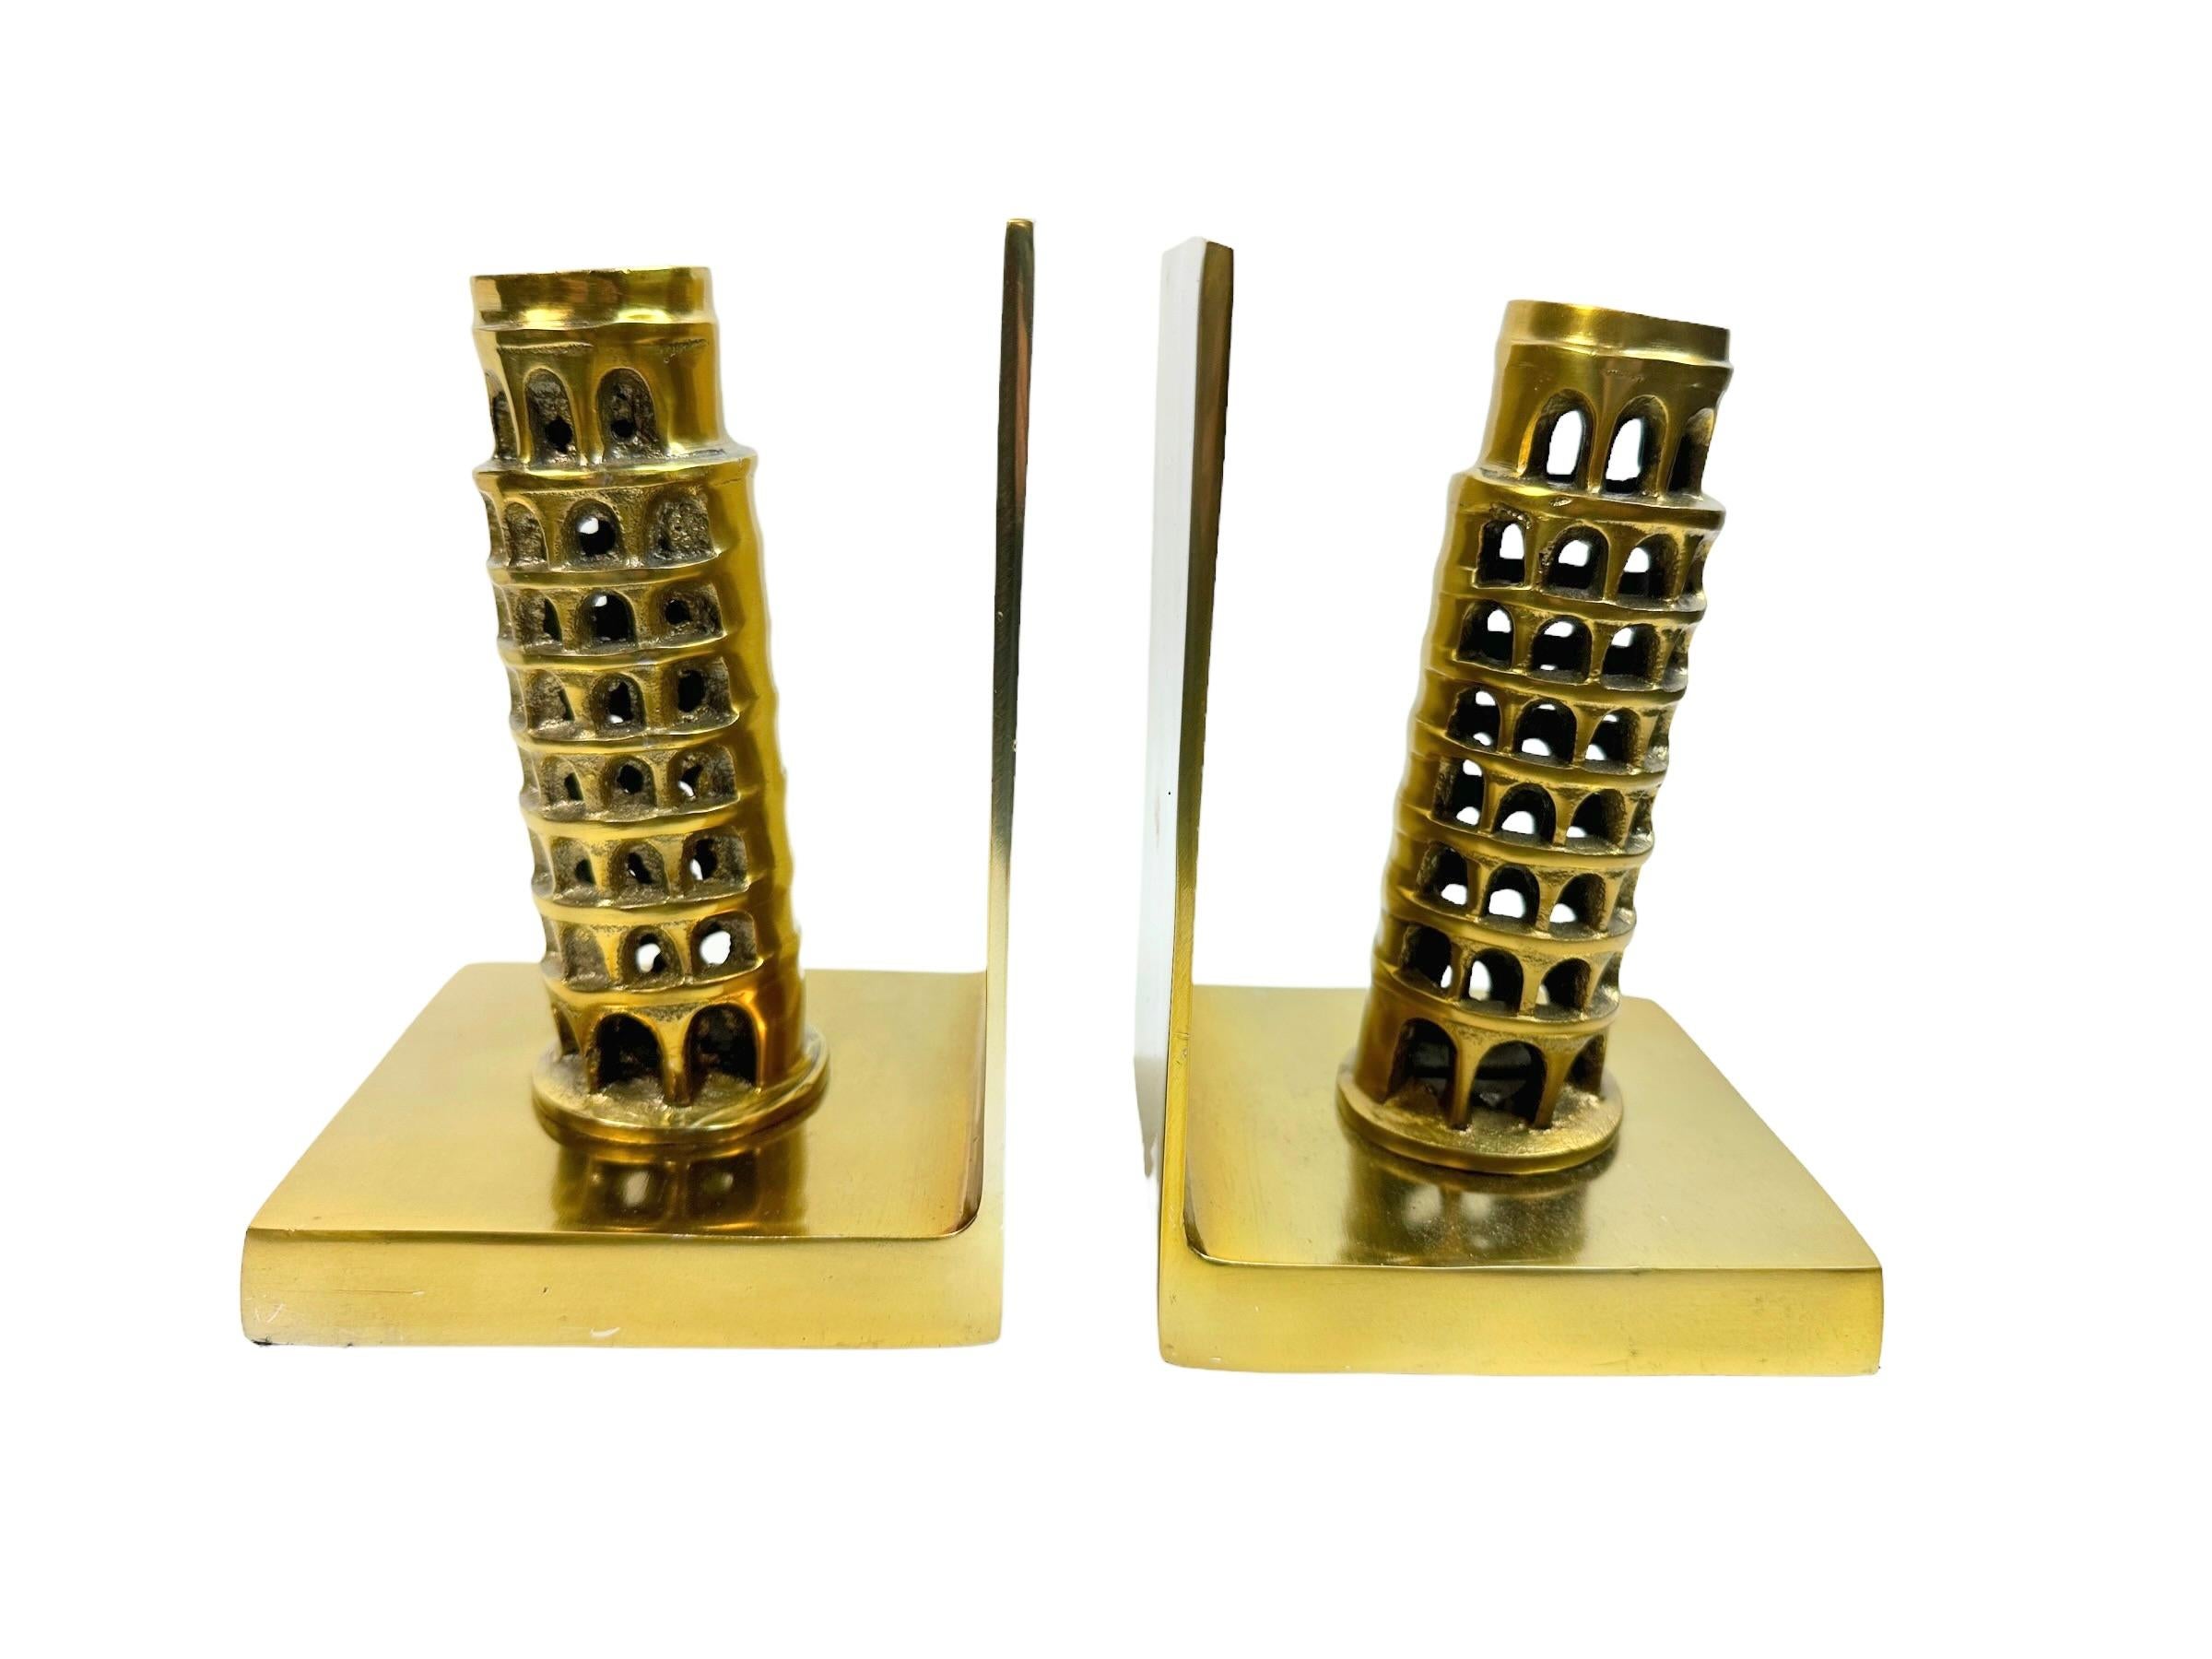 Italian Unique Leaning Tower of Pisa Pair of Bookends, Modernist Italy 1980s For Sale